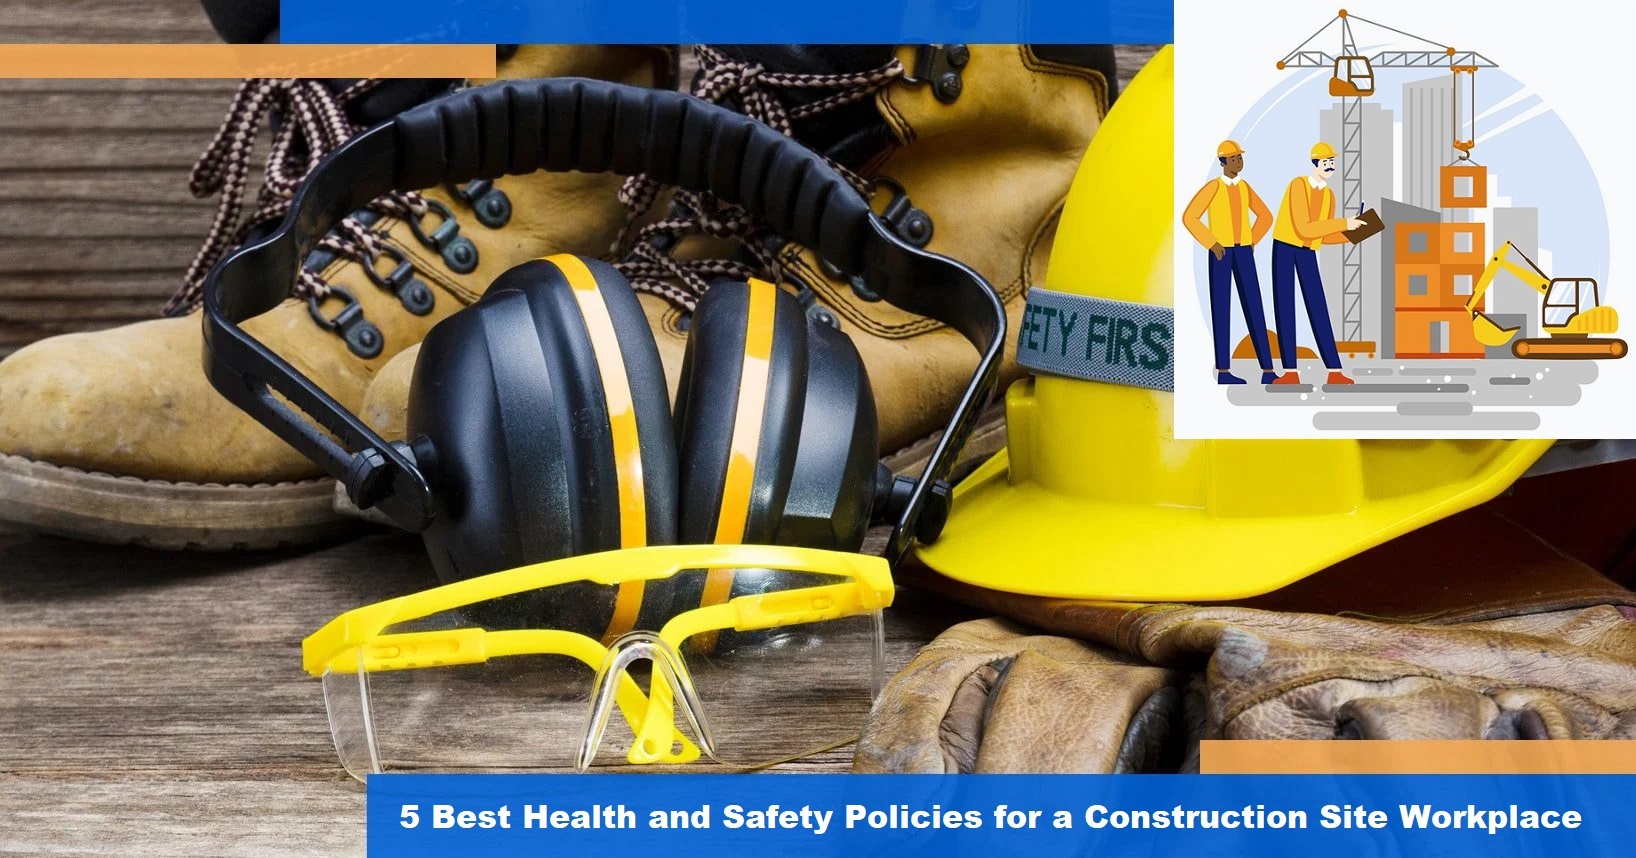 5 Best Health and Safety Policies for a Construction Site Workplace